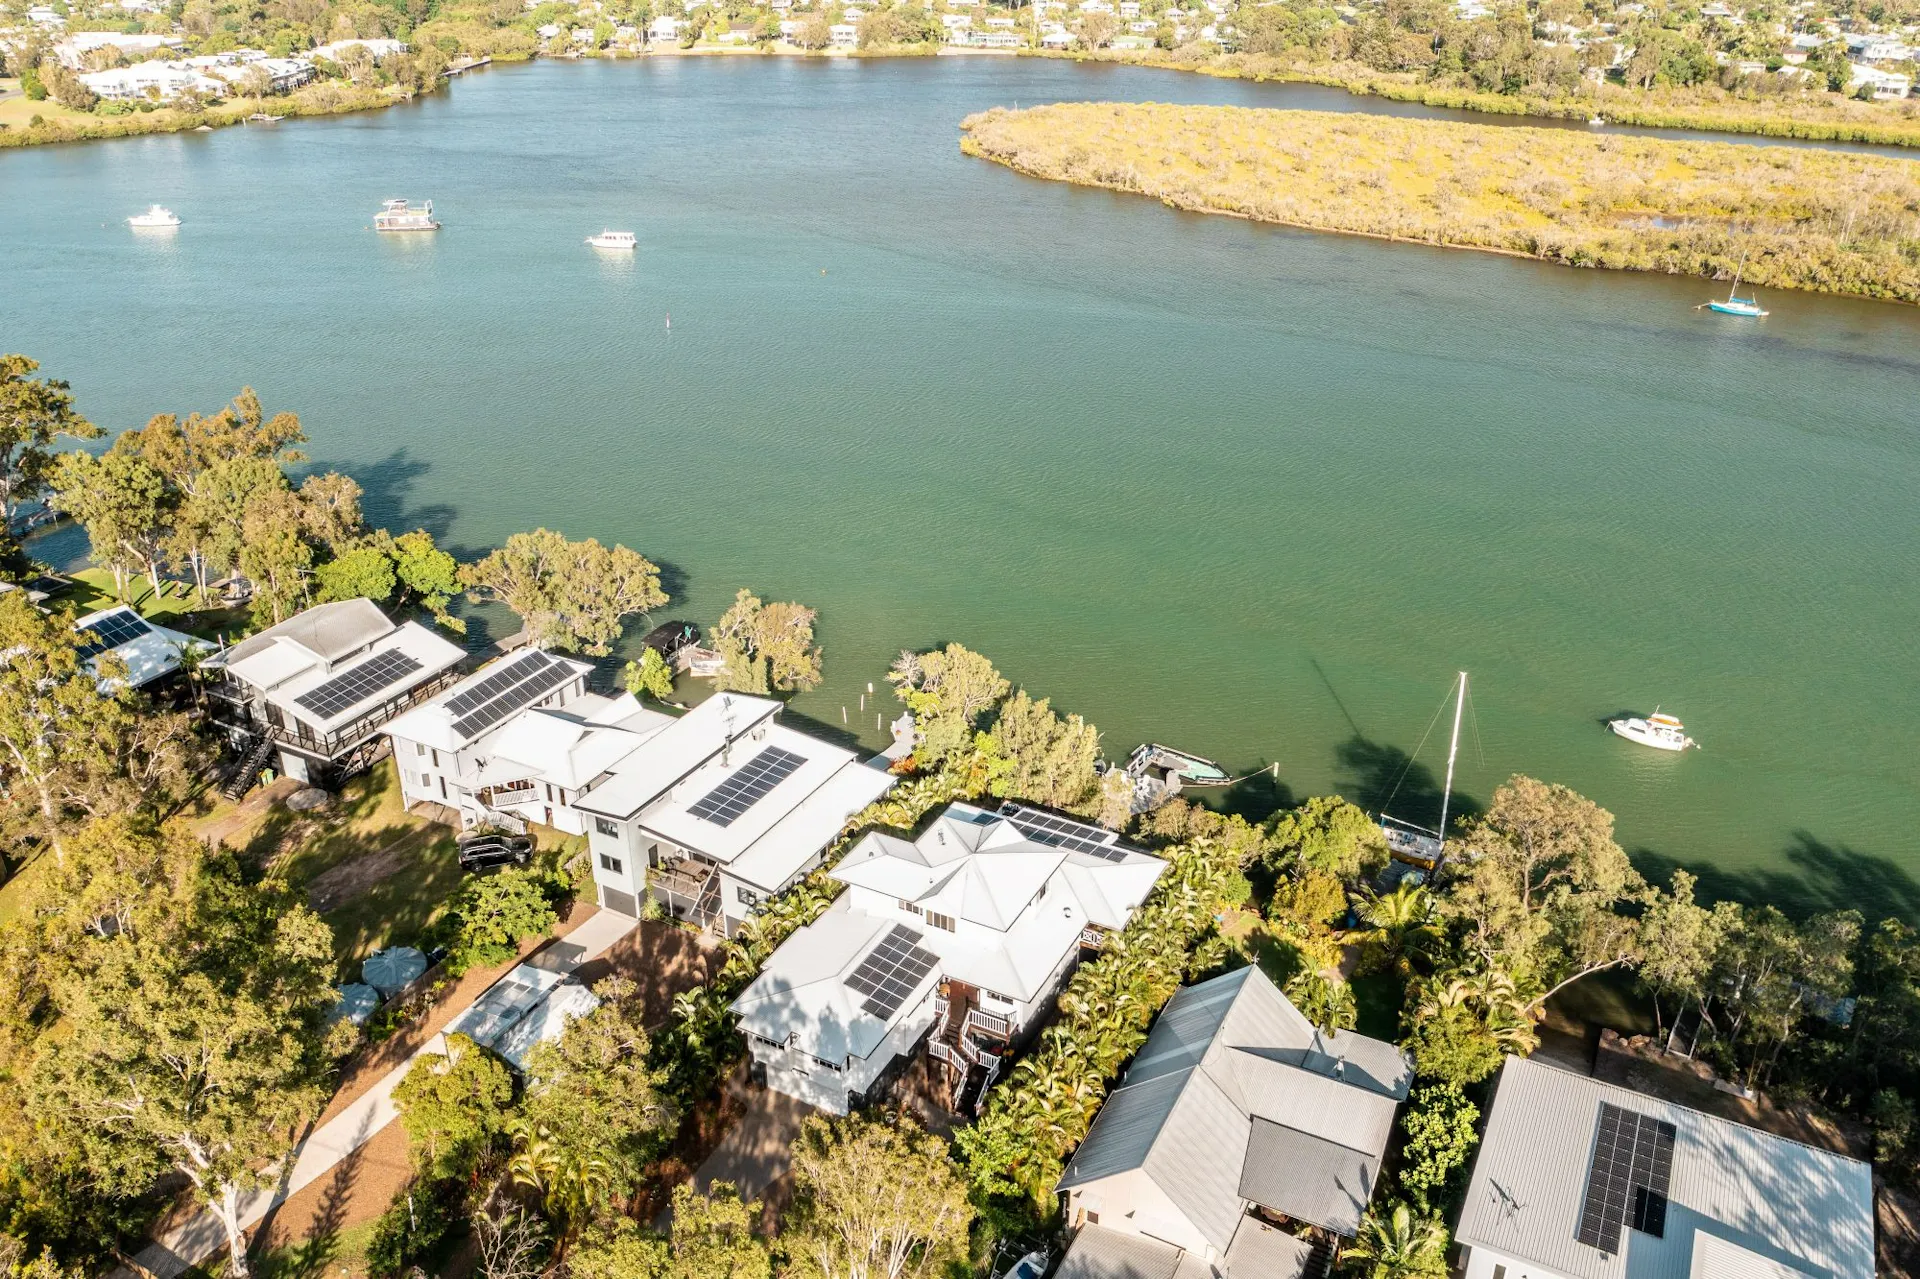 Aerial view of the lodge on the Noosa River